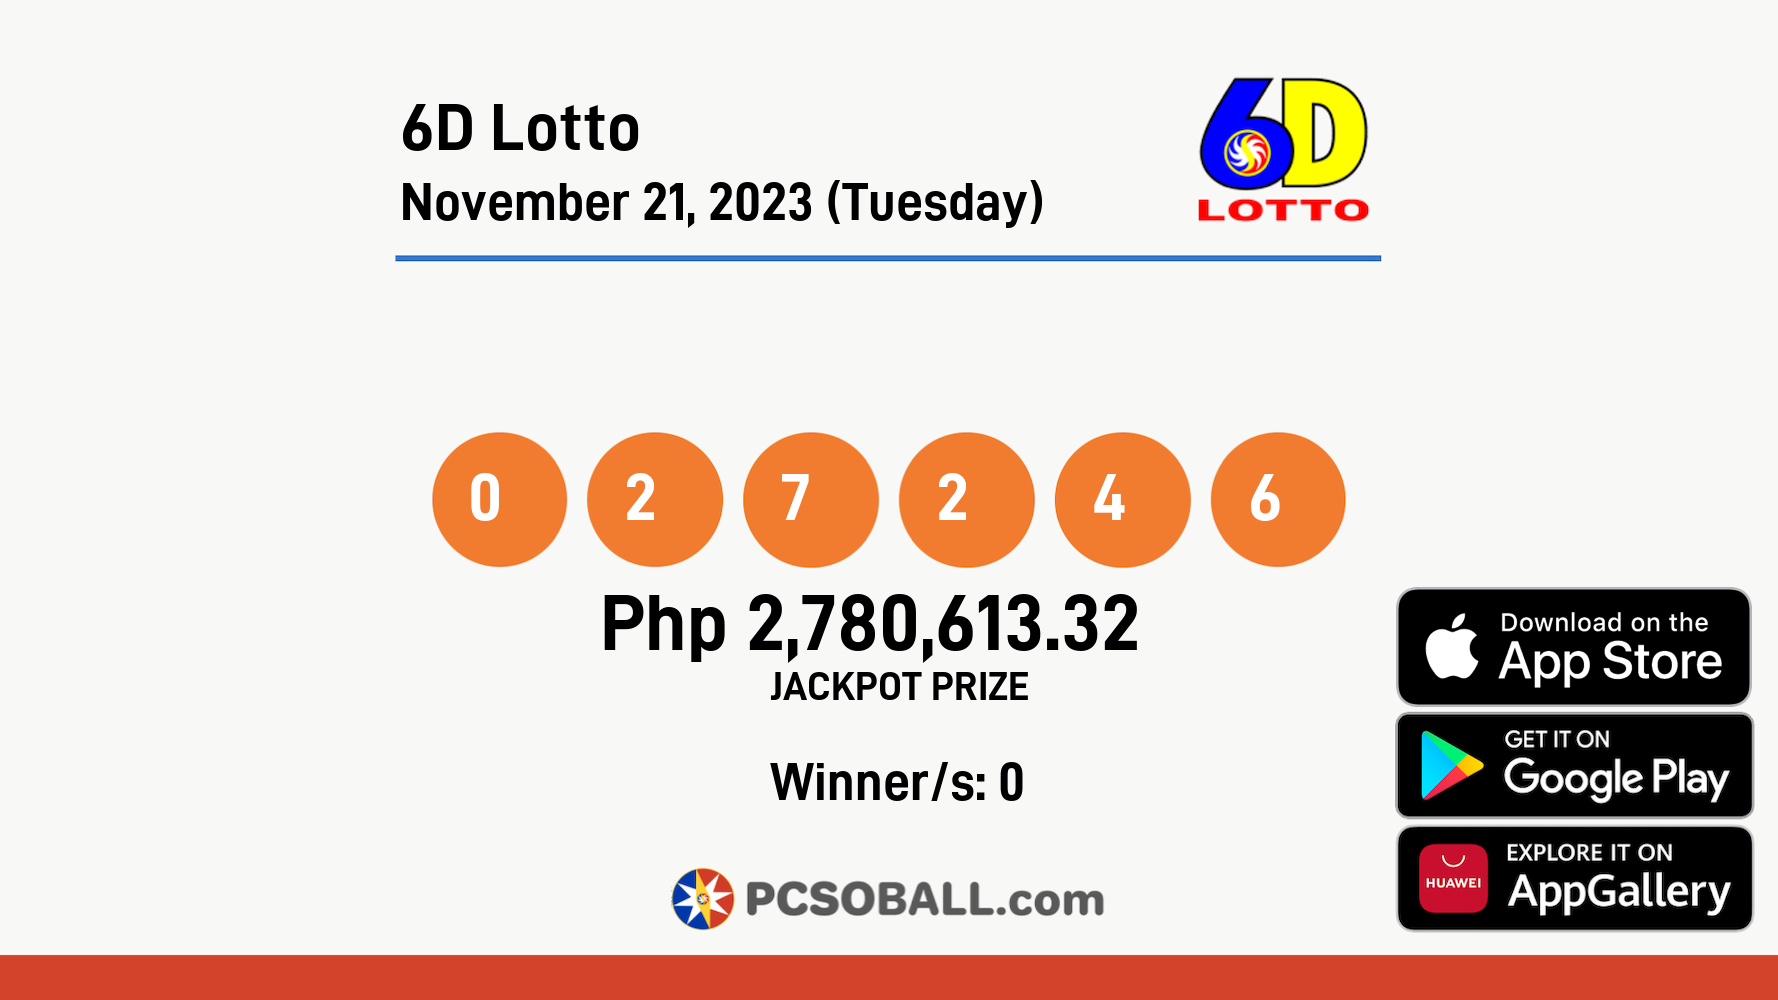 6D Lotto November 21, 2023 (Tuesday) Result